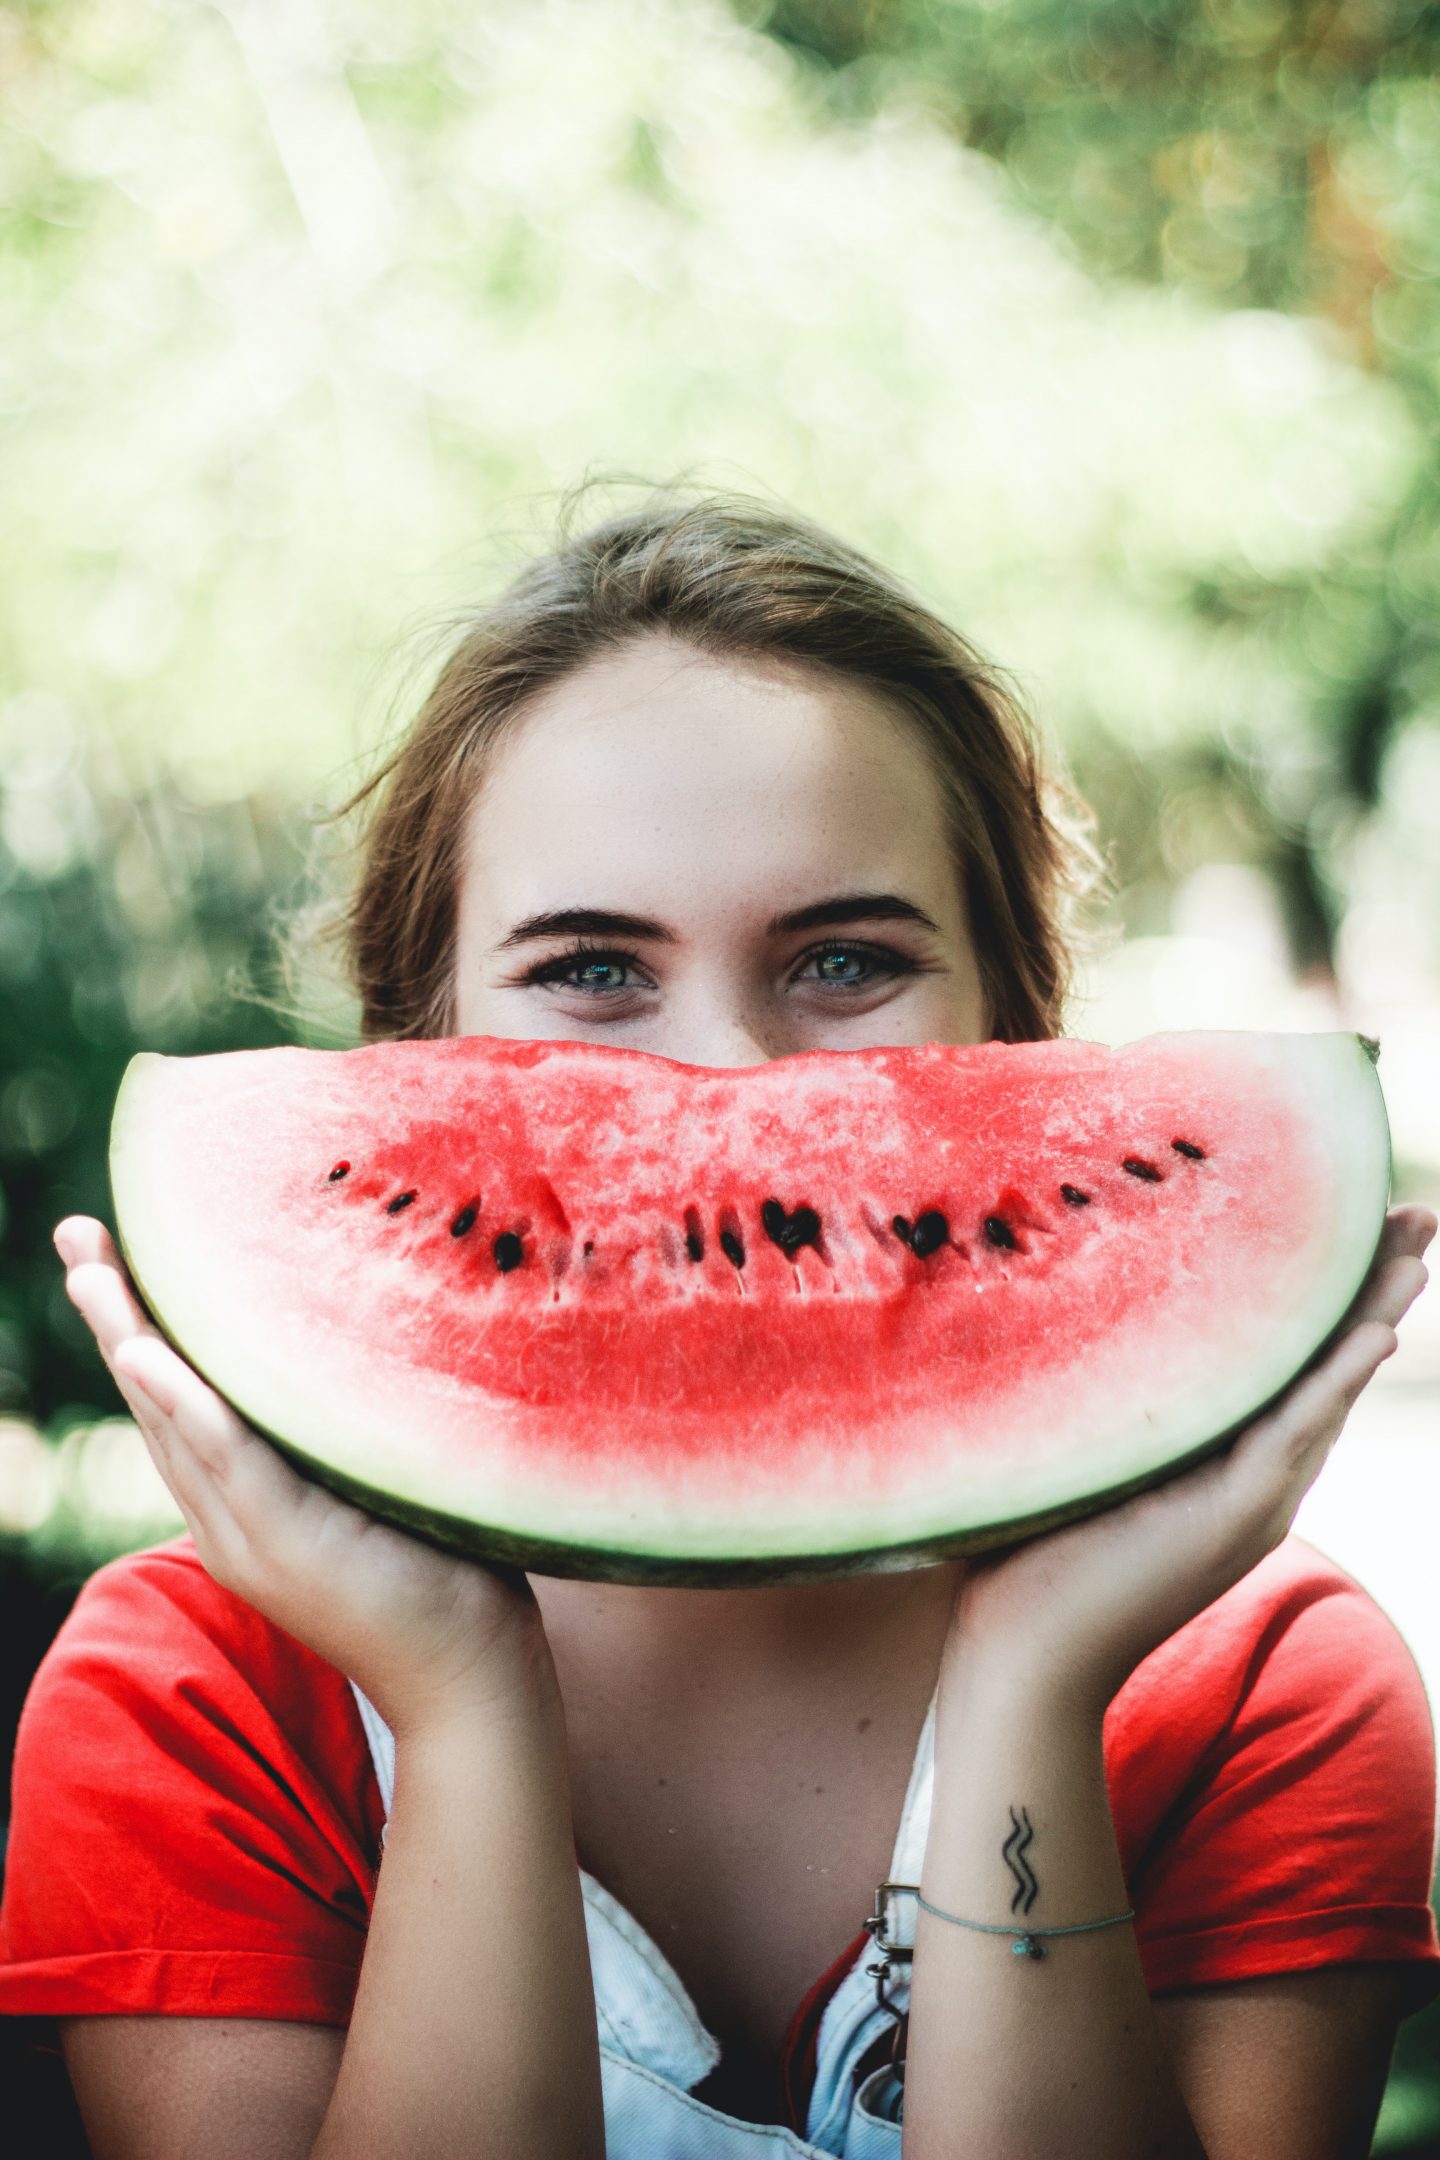 Woman with watermelon smile